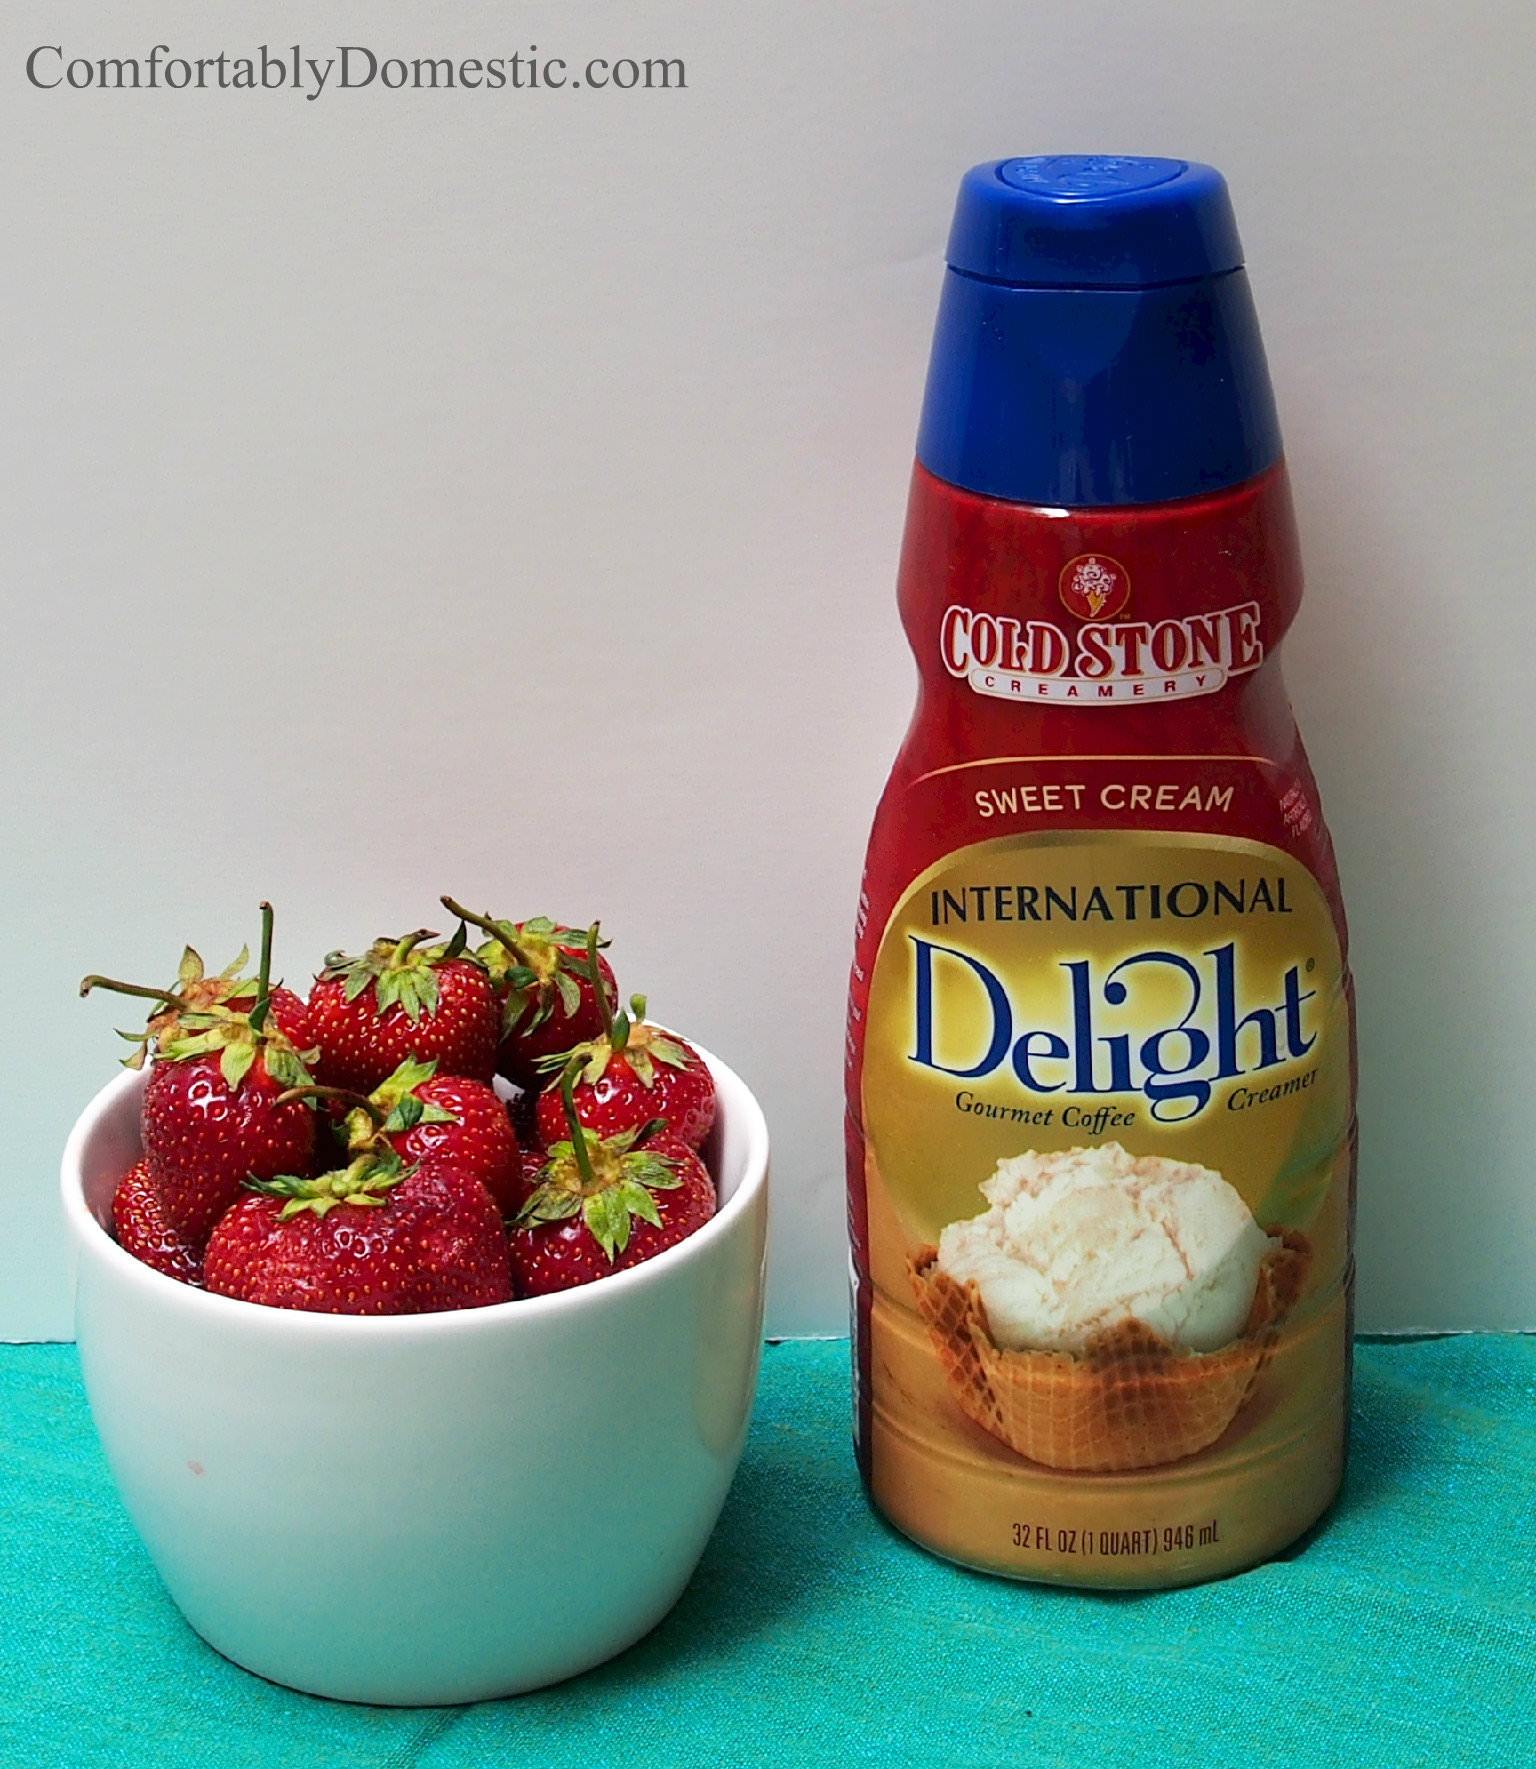 Strawberries and cream, in the form of frozen bars, makes for a tasty and refreshing summer time treat! Easy to make with the help of Cold Stone International Delights creamer!